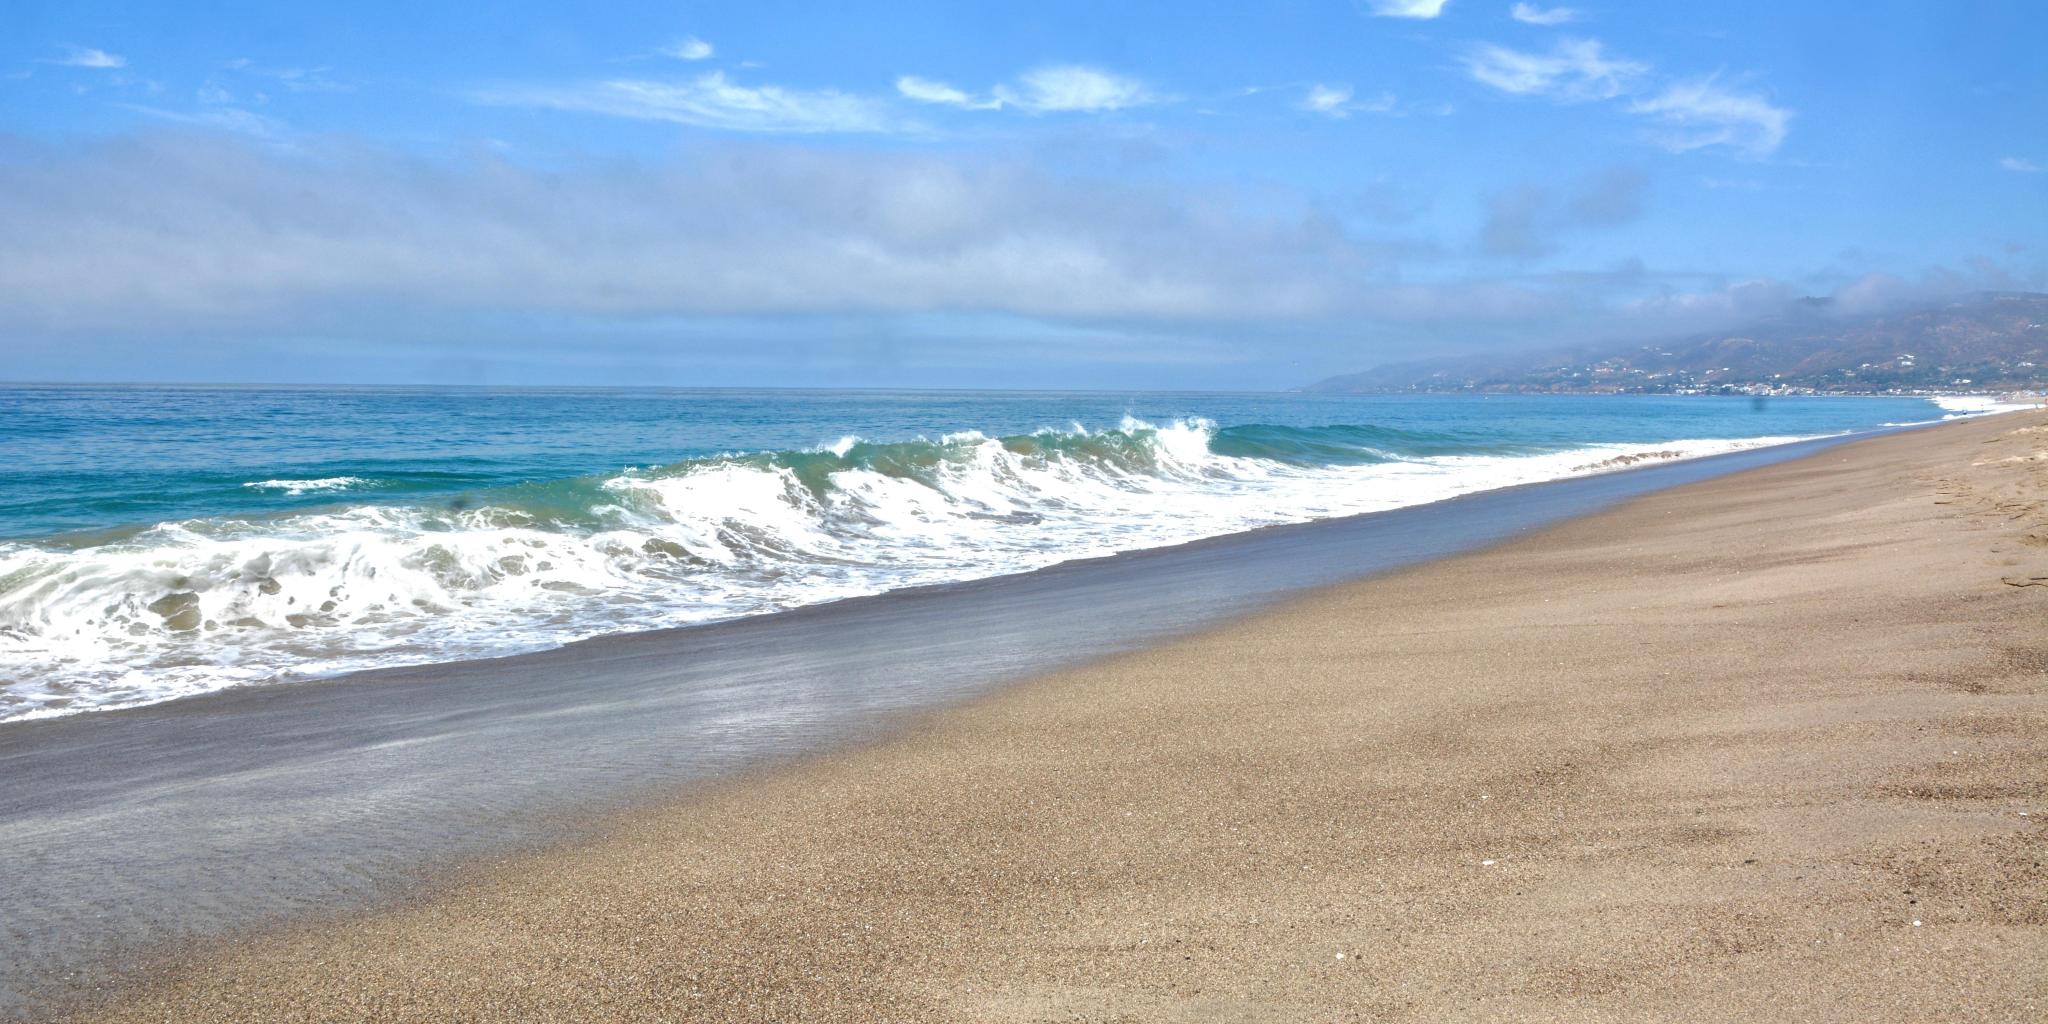 Zuma Beach – Exploring 10 of the Top Beaches in Los Angeles